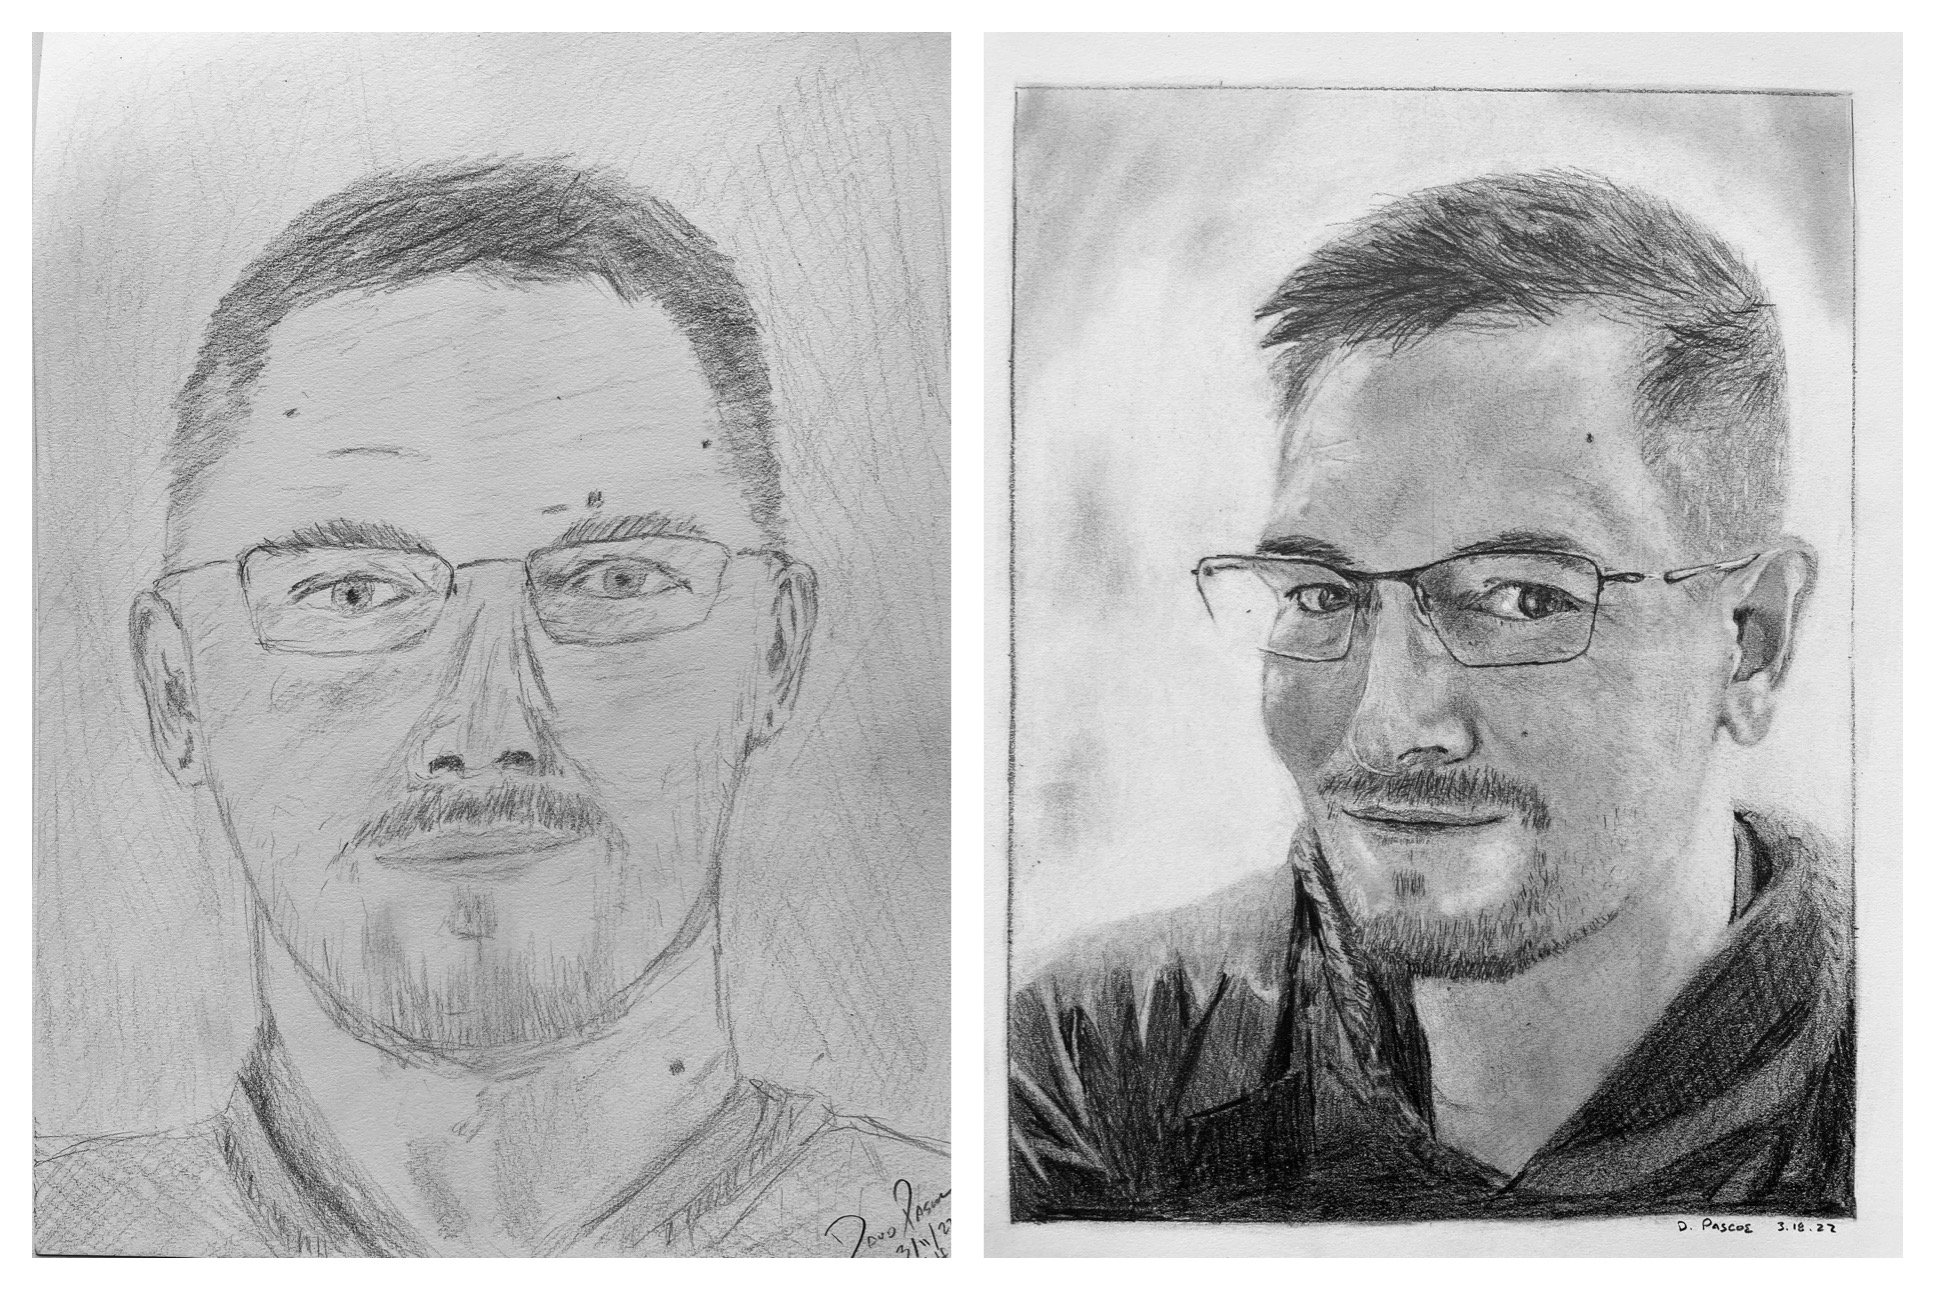 David's Before and After Self-Portraits March 14-18, 2022